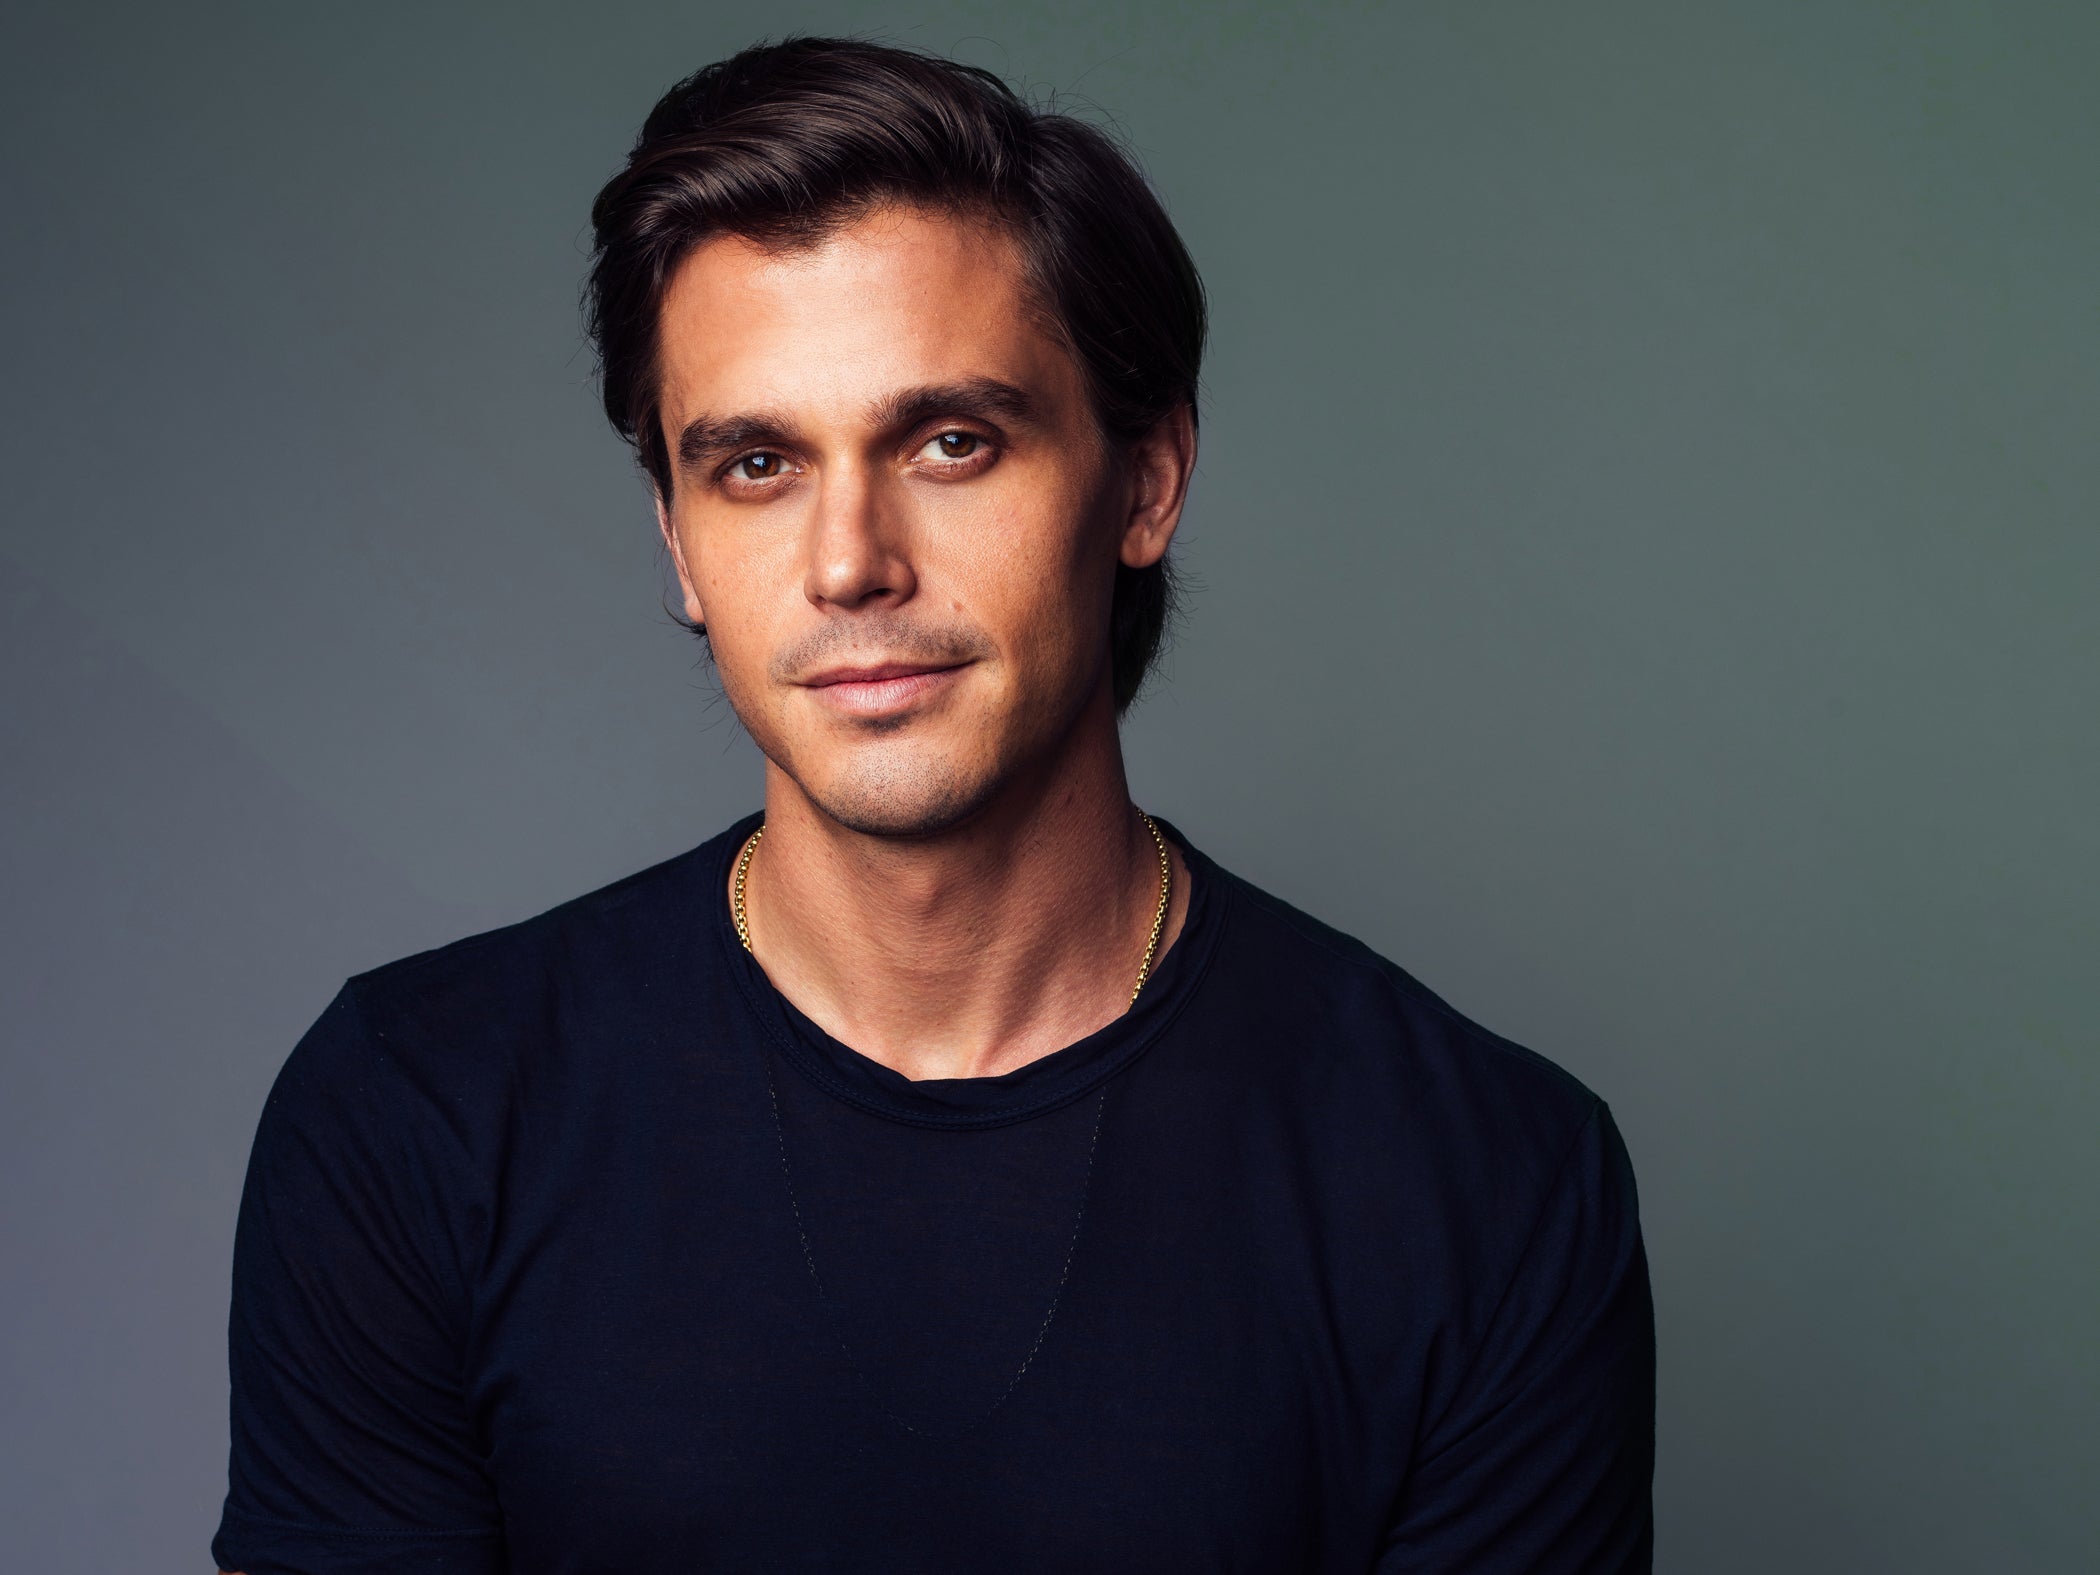 Porowski is the resident food and wine expert on Netflix’s ‘Queer Eye’